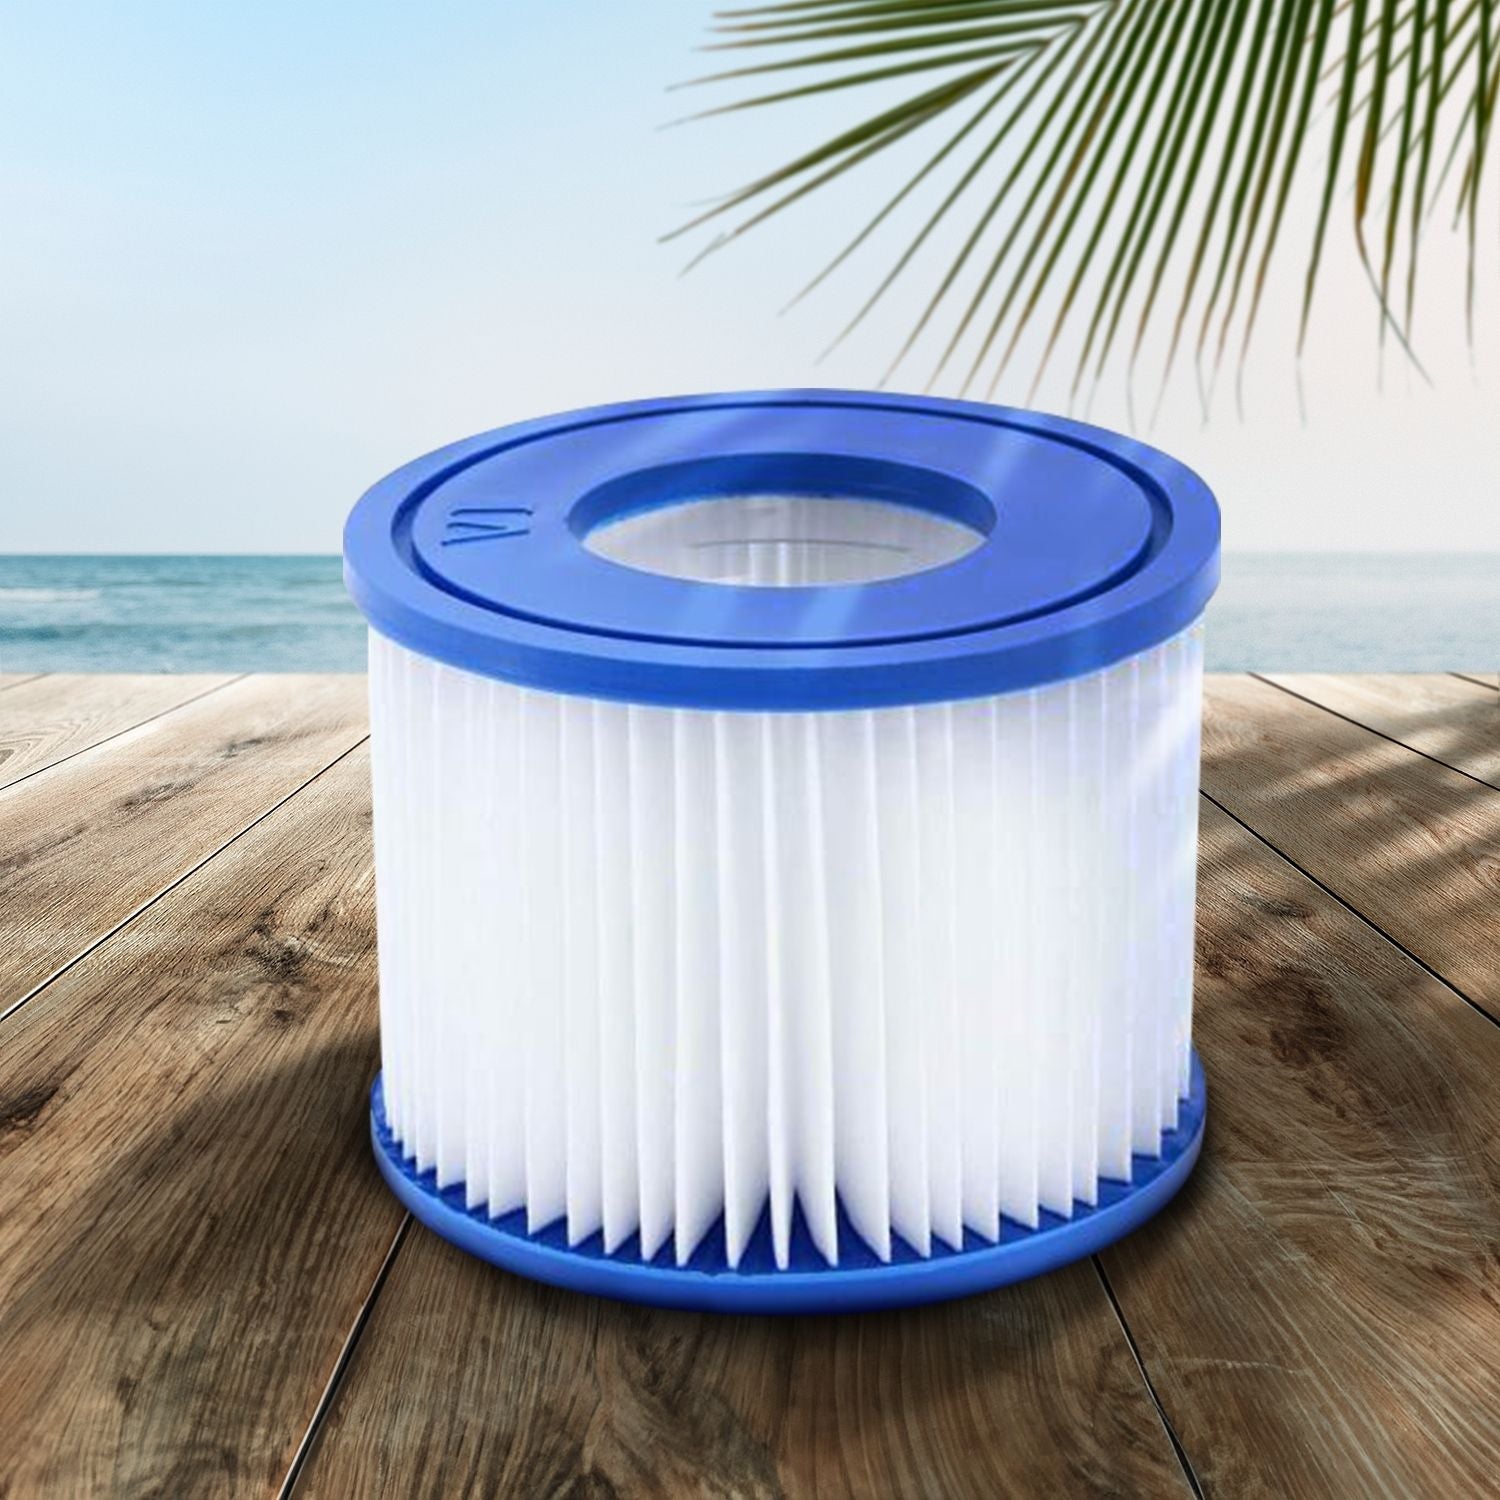 8 Pack Hot Tub Spa Filter Replacement Cartridge Size ? (Blue and White) NE-FR-100-JIZ